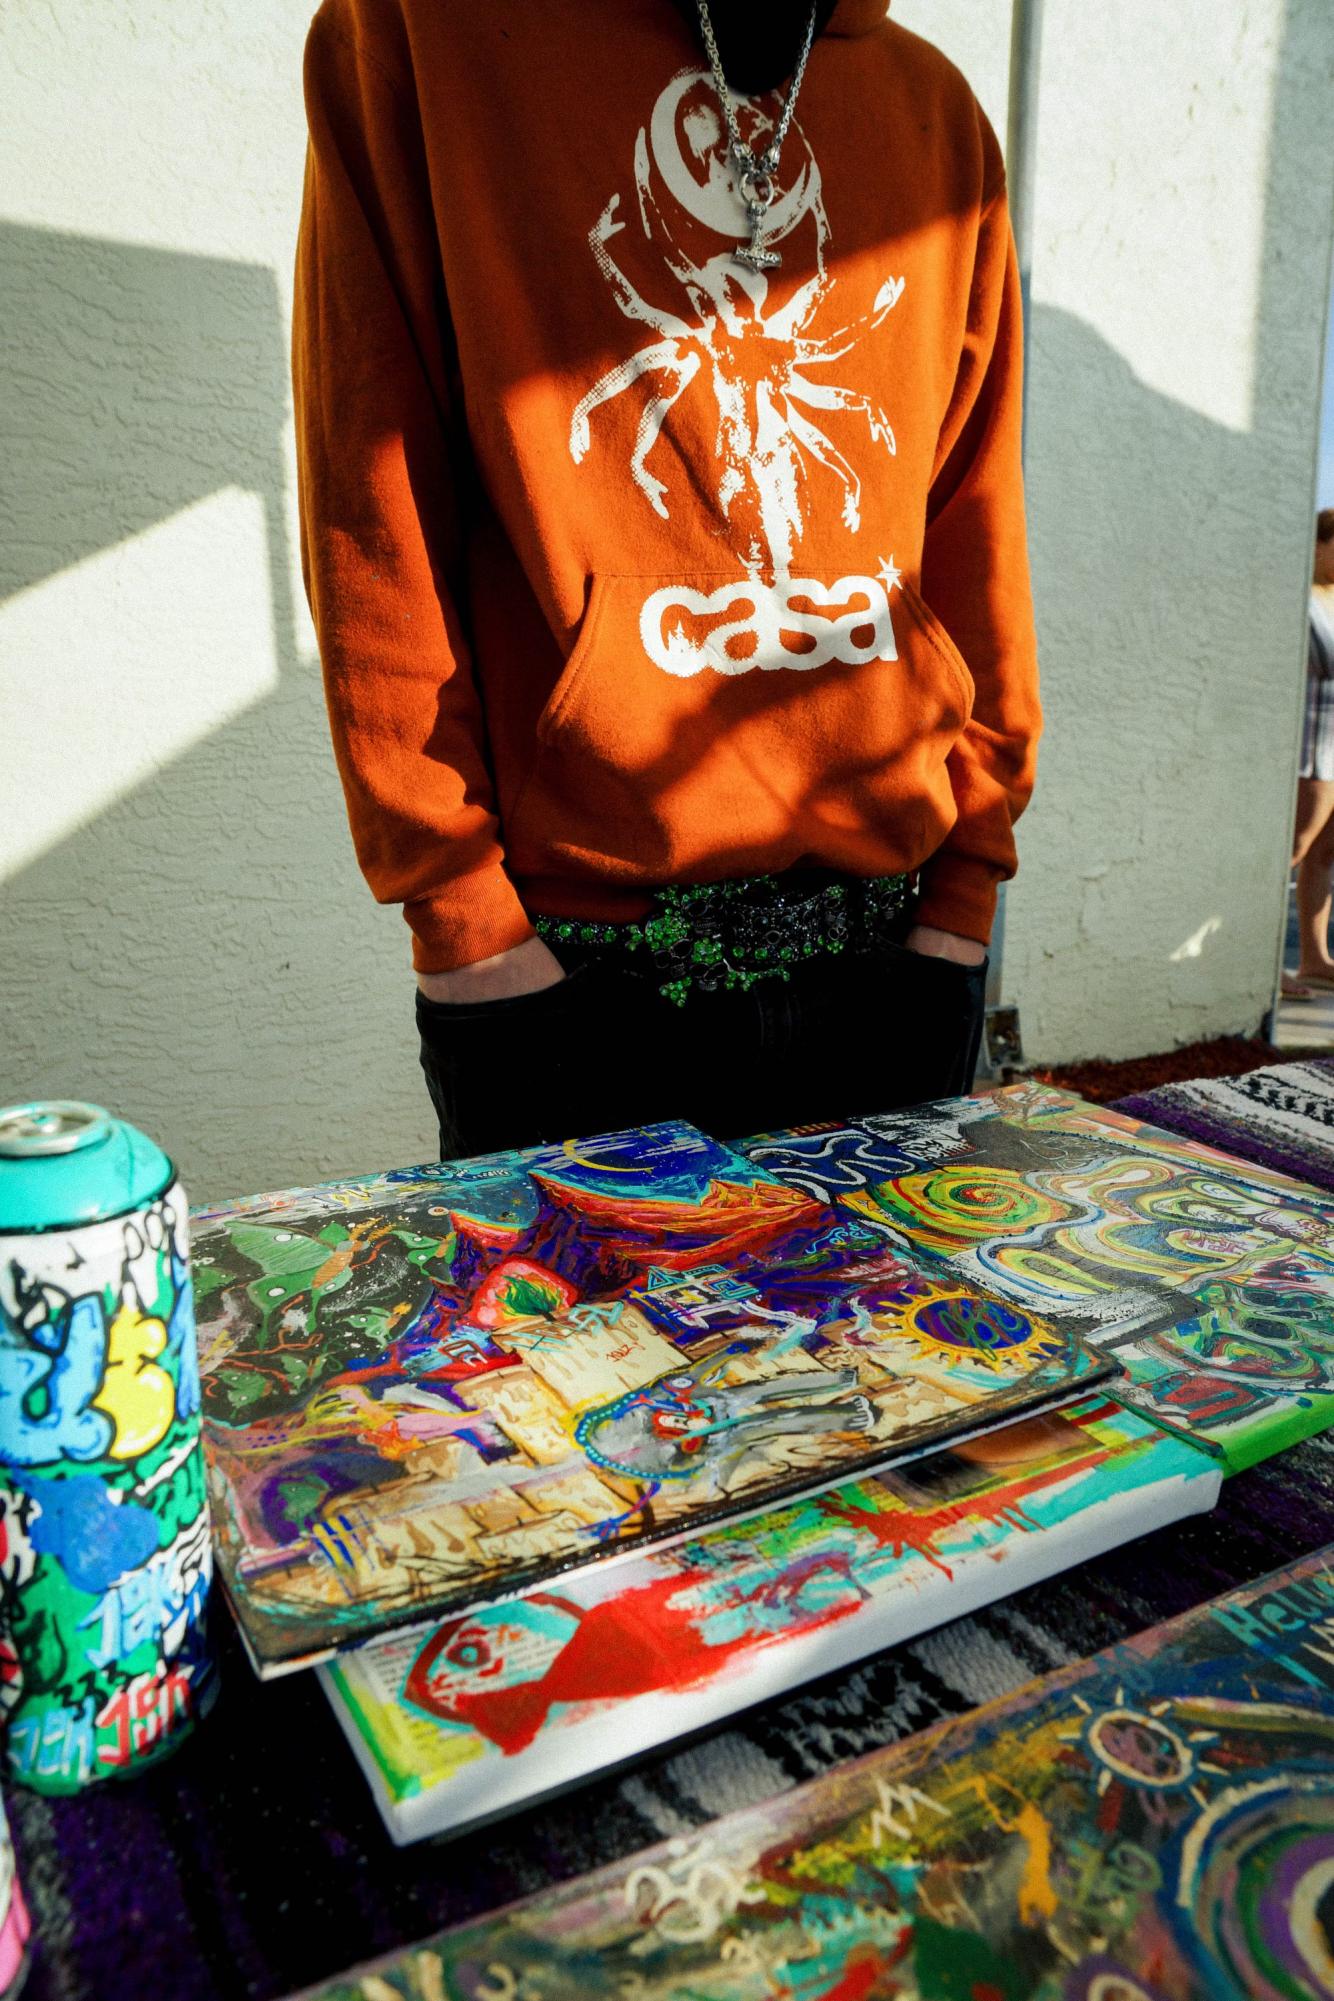 Displaying Casa Noche artwork, Vignier poses with a one-of-a-kind orange hoodie from his brand. 